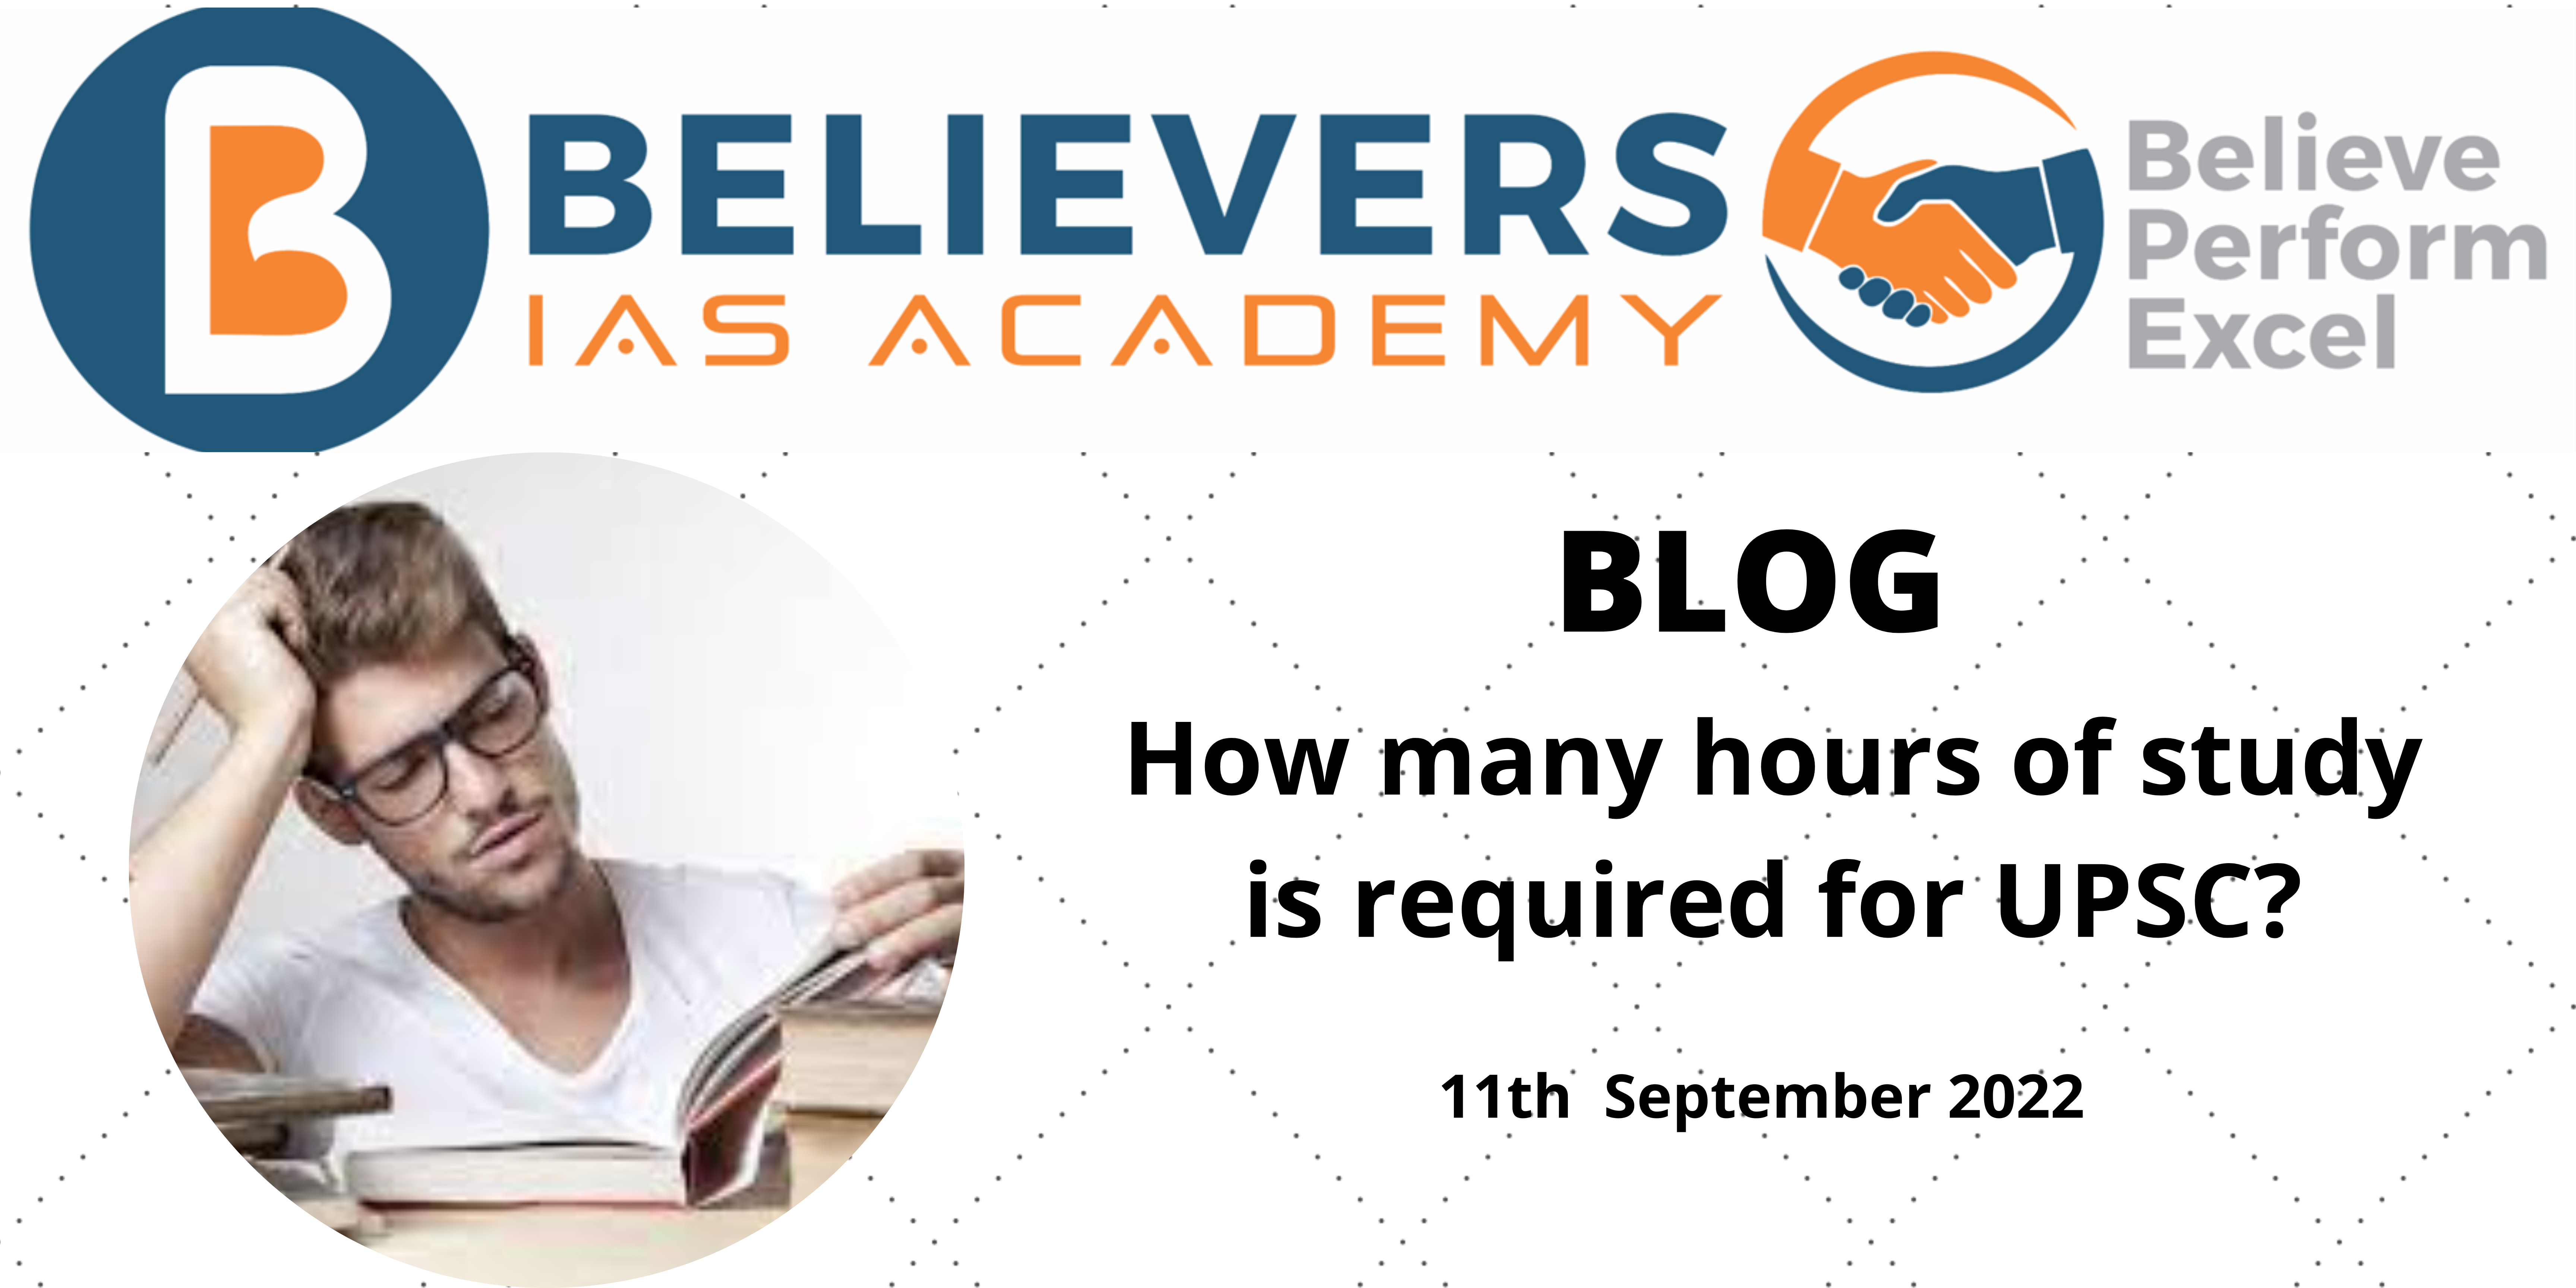 How many hours of study is required for UPSC?